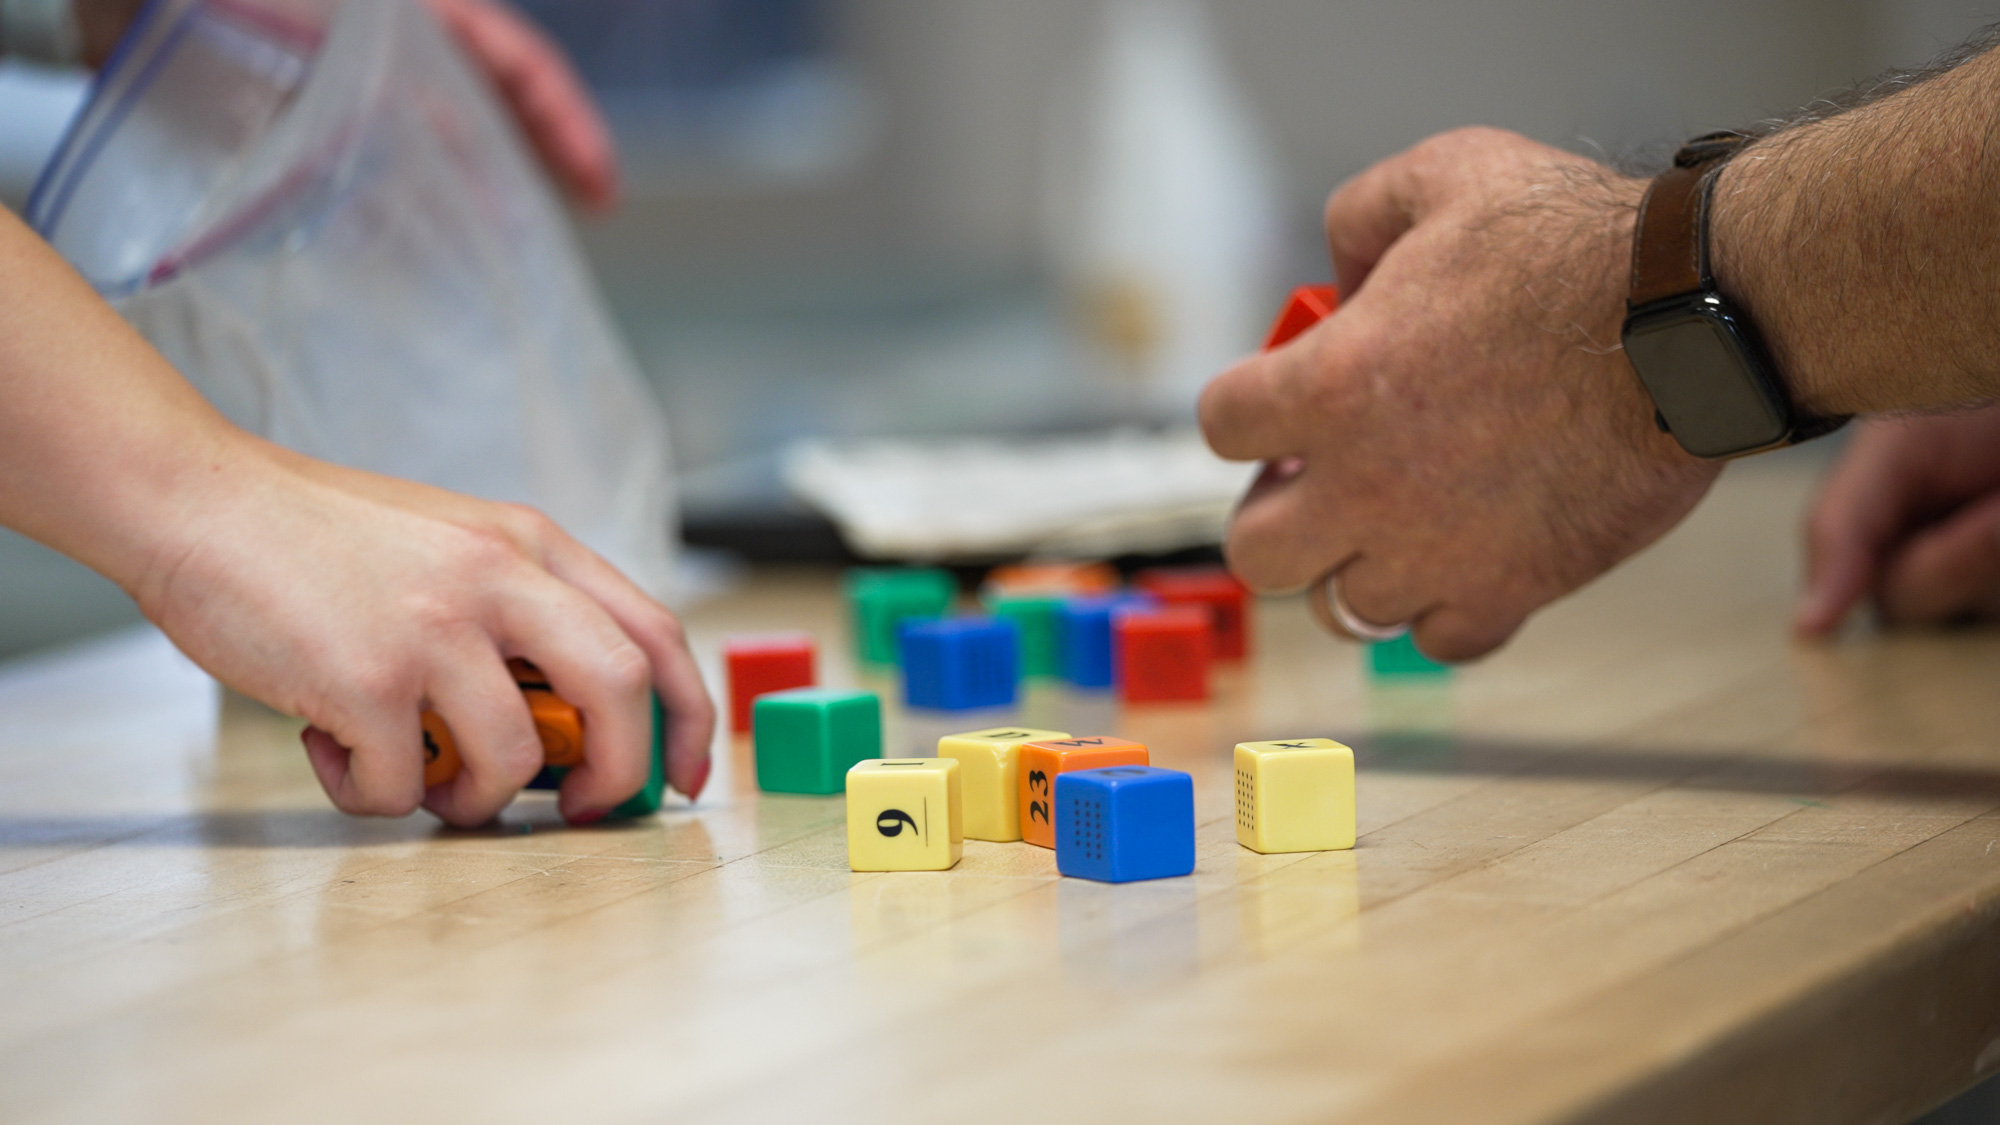 patient picking up colorful blocks